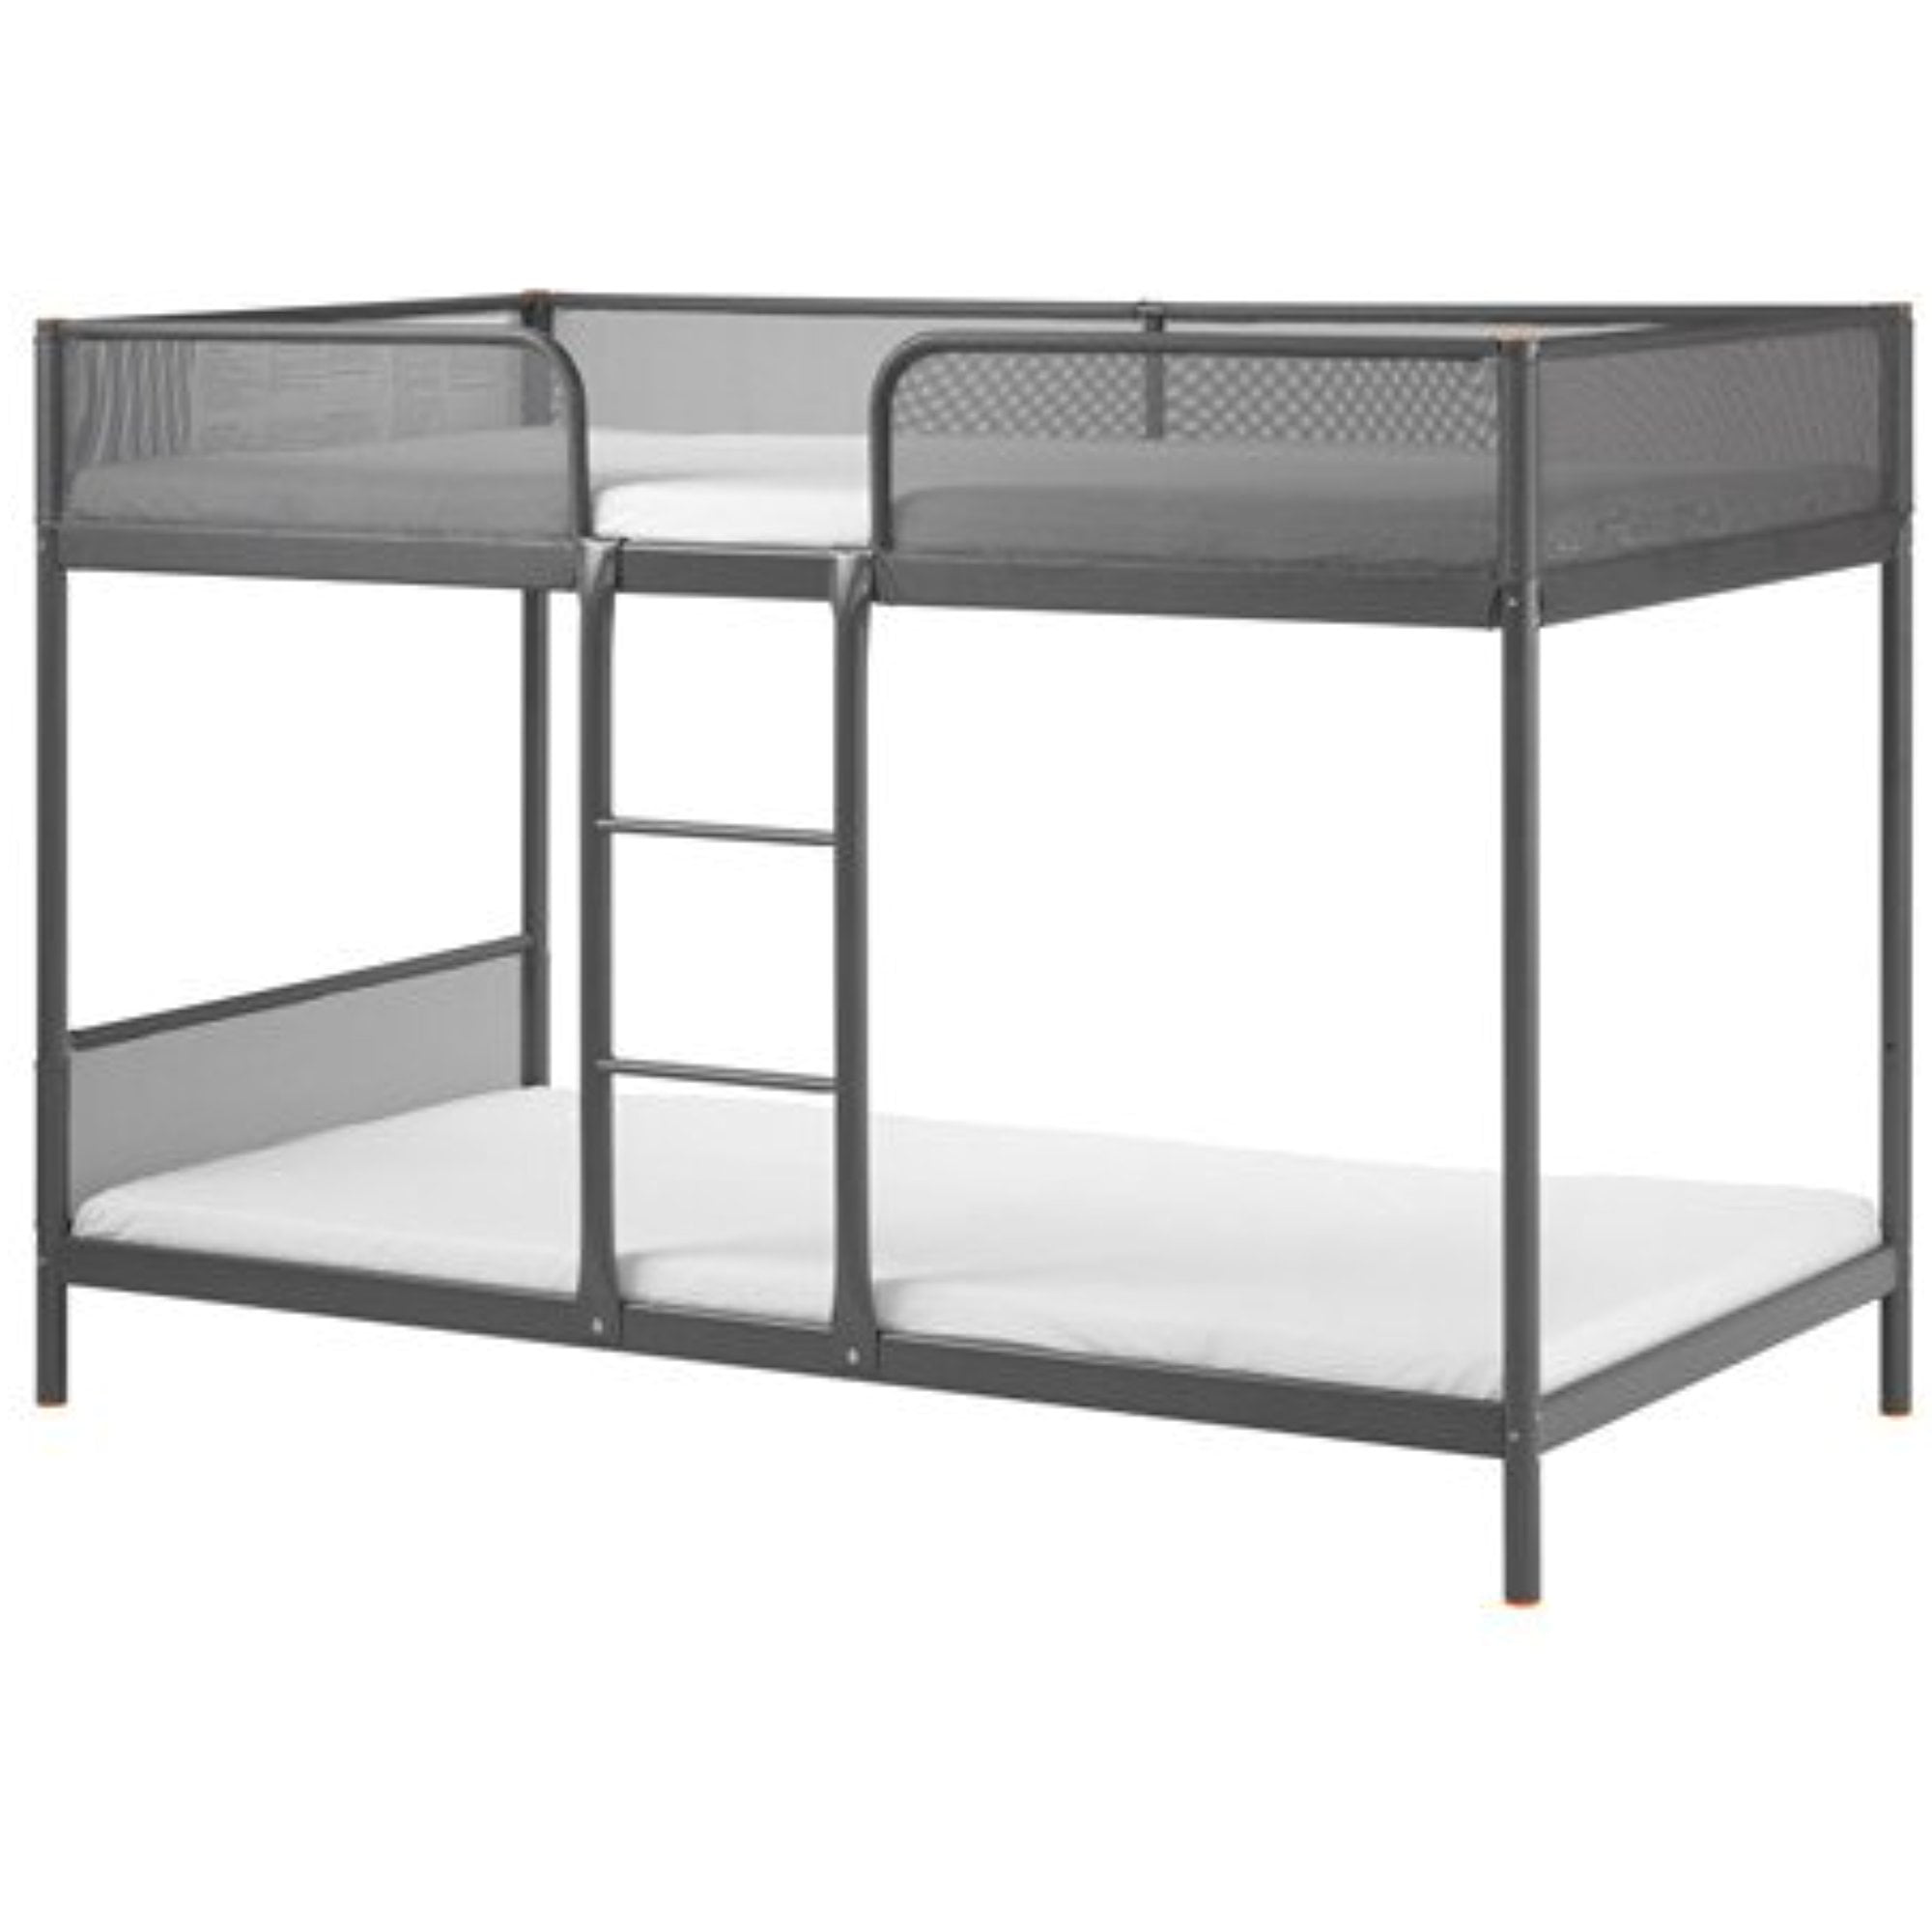 Ikea Tuffing Bunk Bed Frame 30210 29298, Ikea Metal Bunk Beds Double